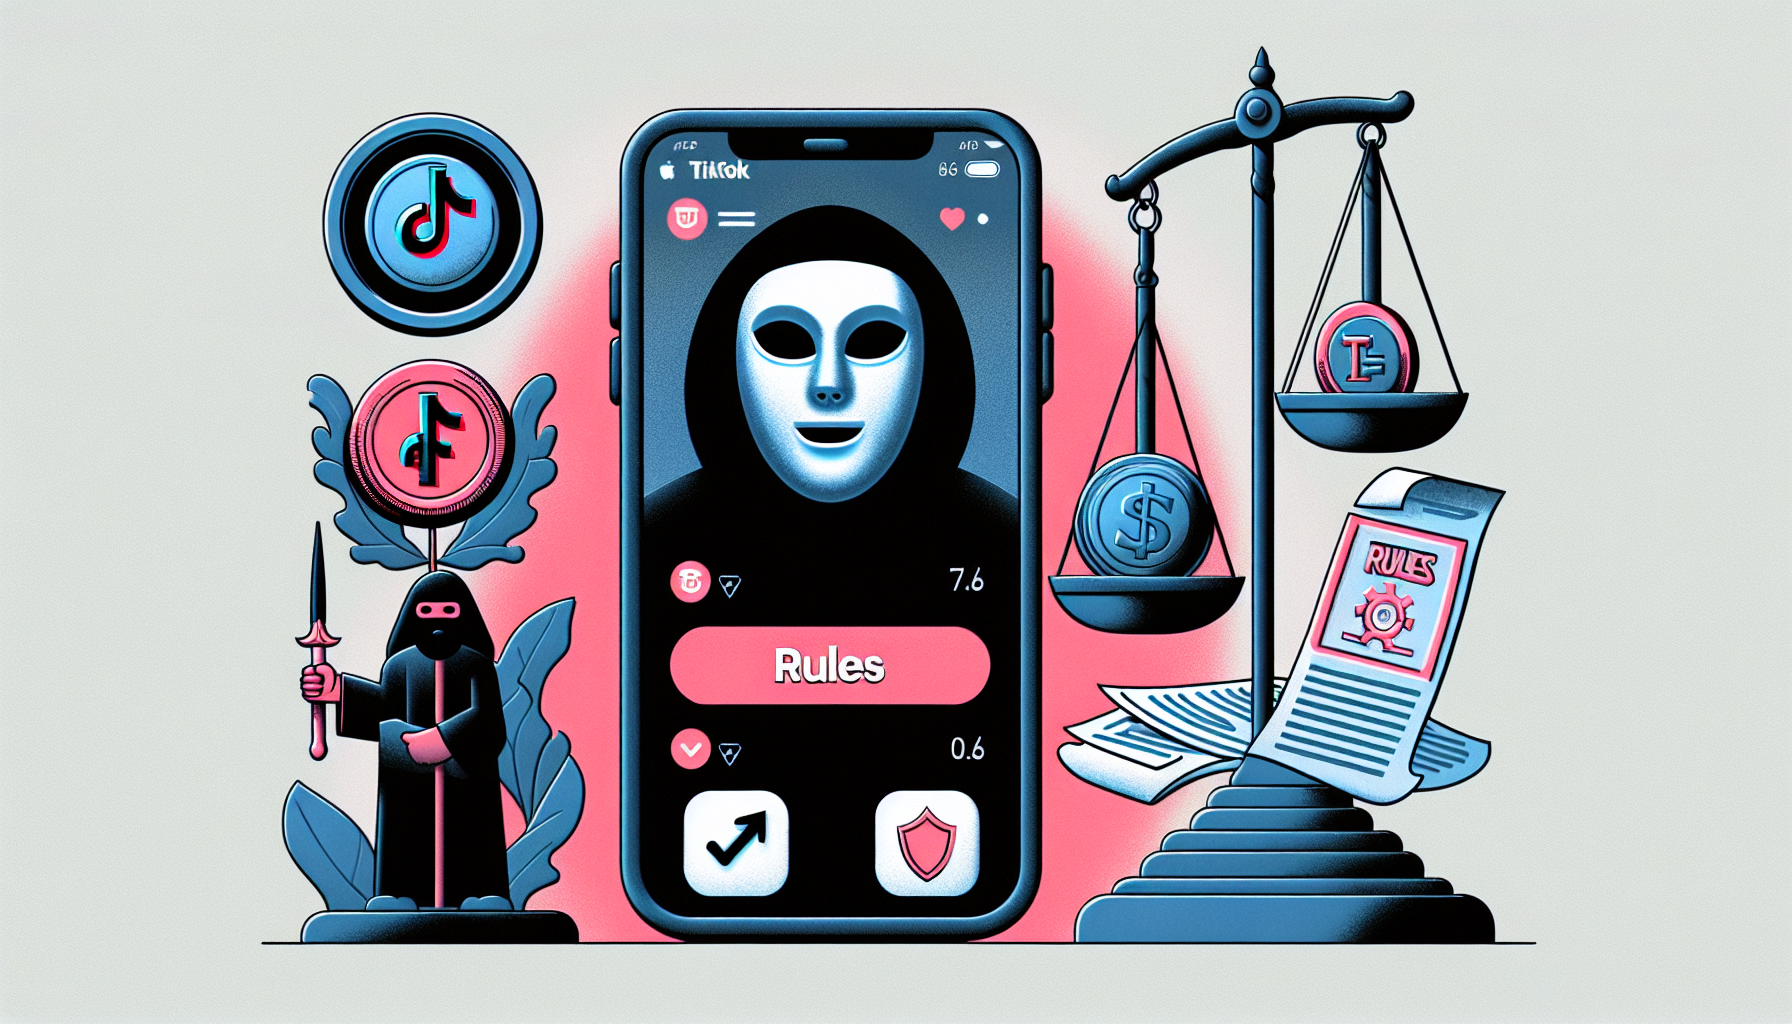 TikTok might be circumventing Apple's rules for in-app purchases concerning its coins.